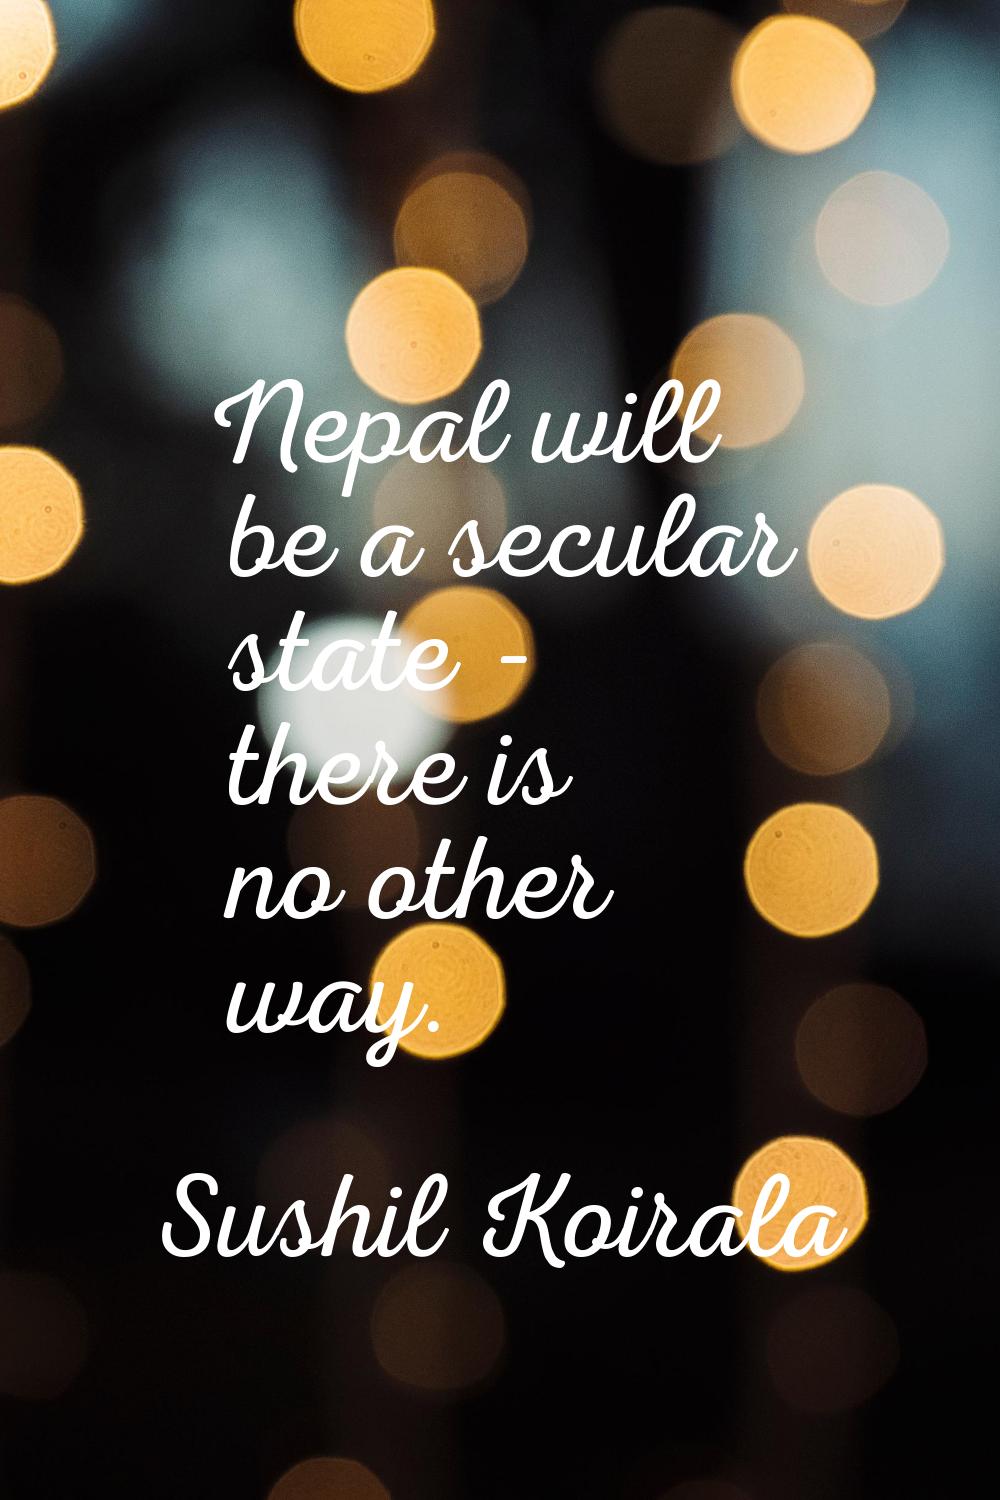 Nepal will be a secular state - there is no other way.